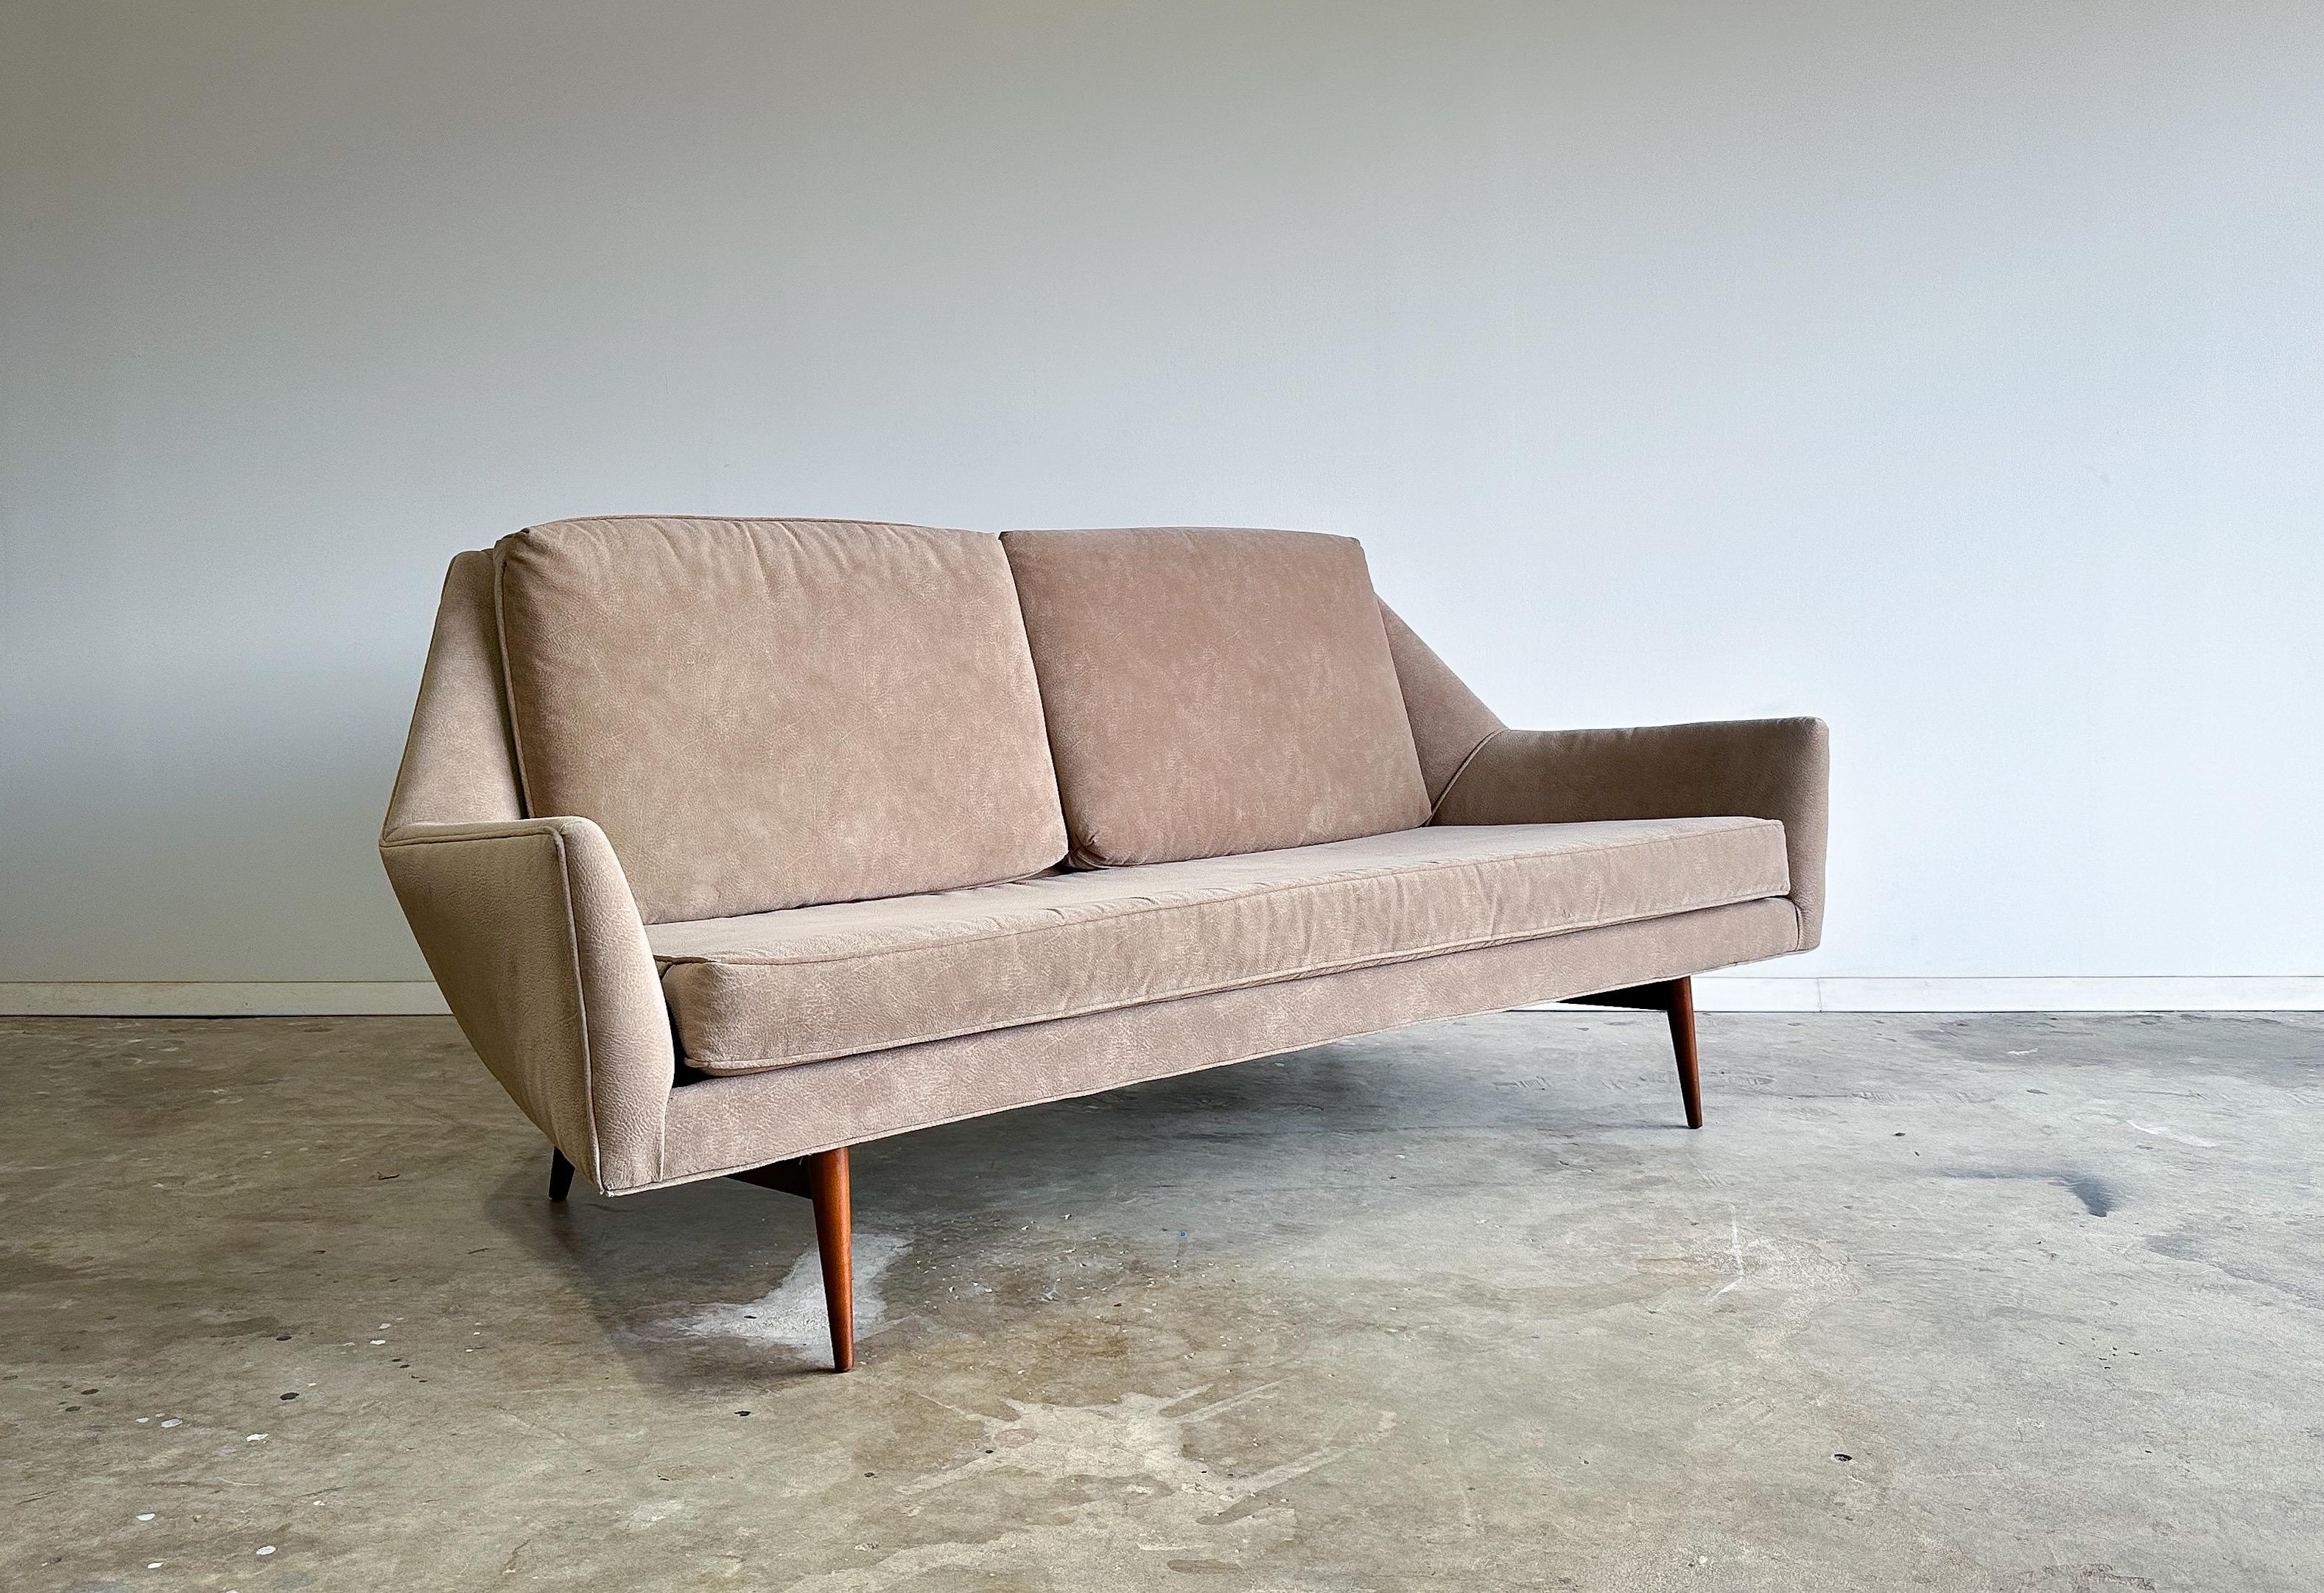 A rare sofa, model 3147, designed by Paul McCobb for Directional and manufactured by Custom Craft Inc. Similar to some of McCobb's other 